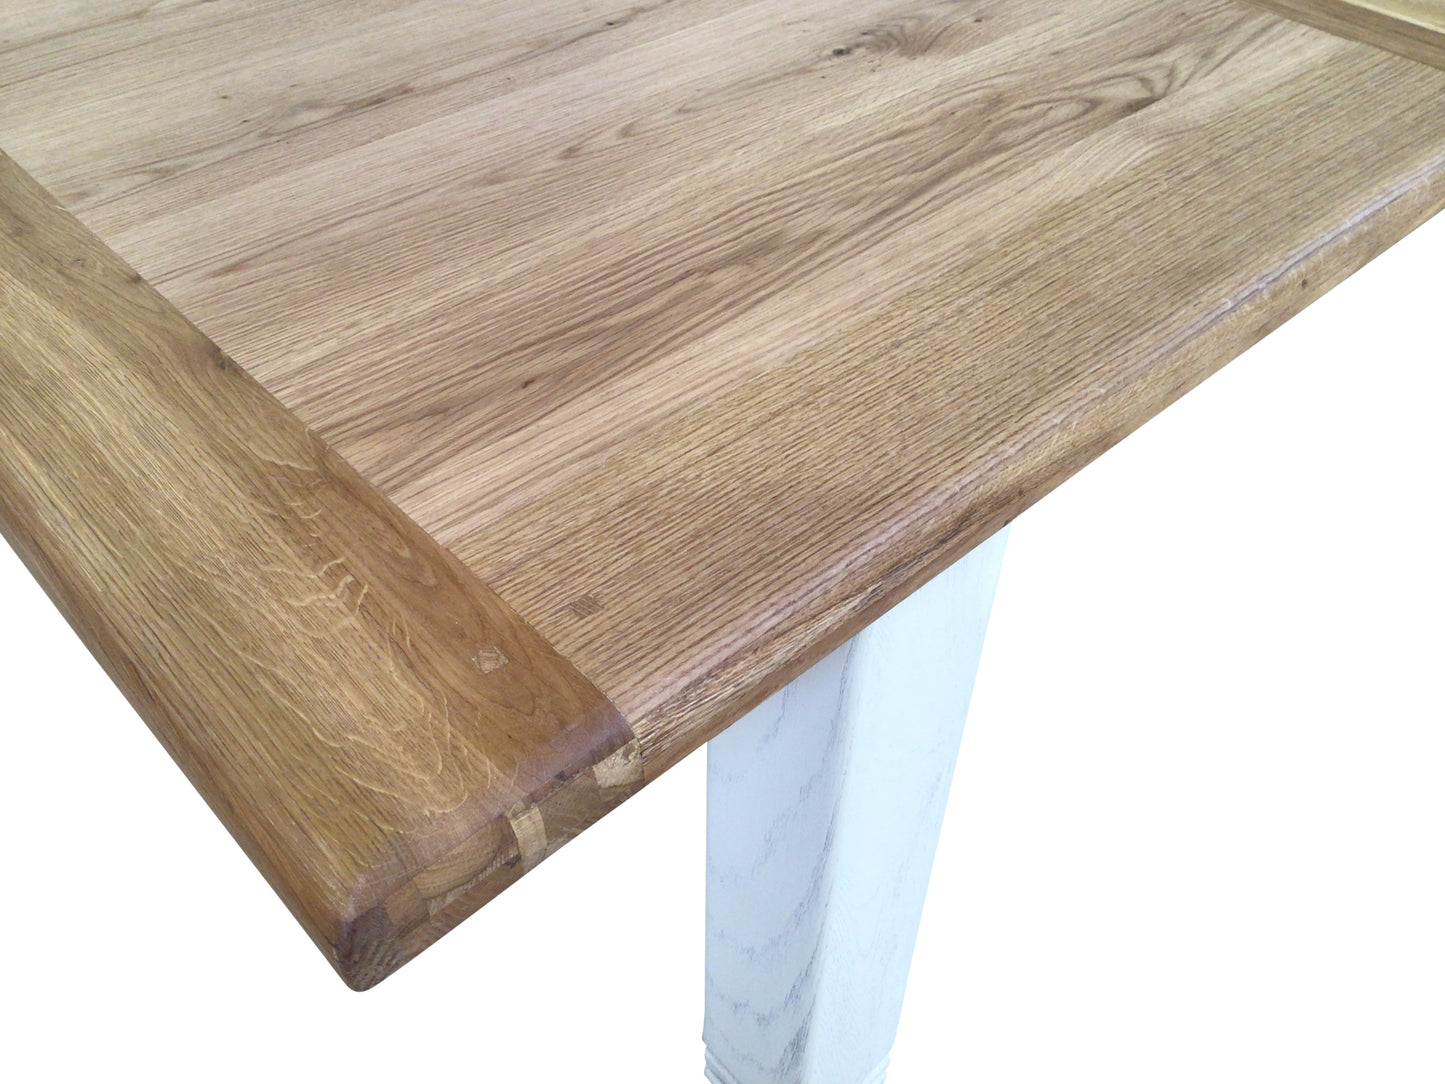 Danube Oak 1.8m Extension Dining Table painted Off-White